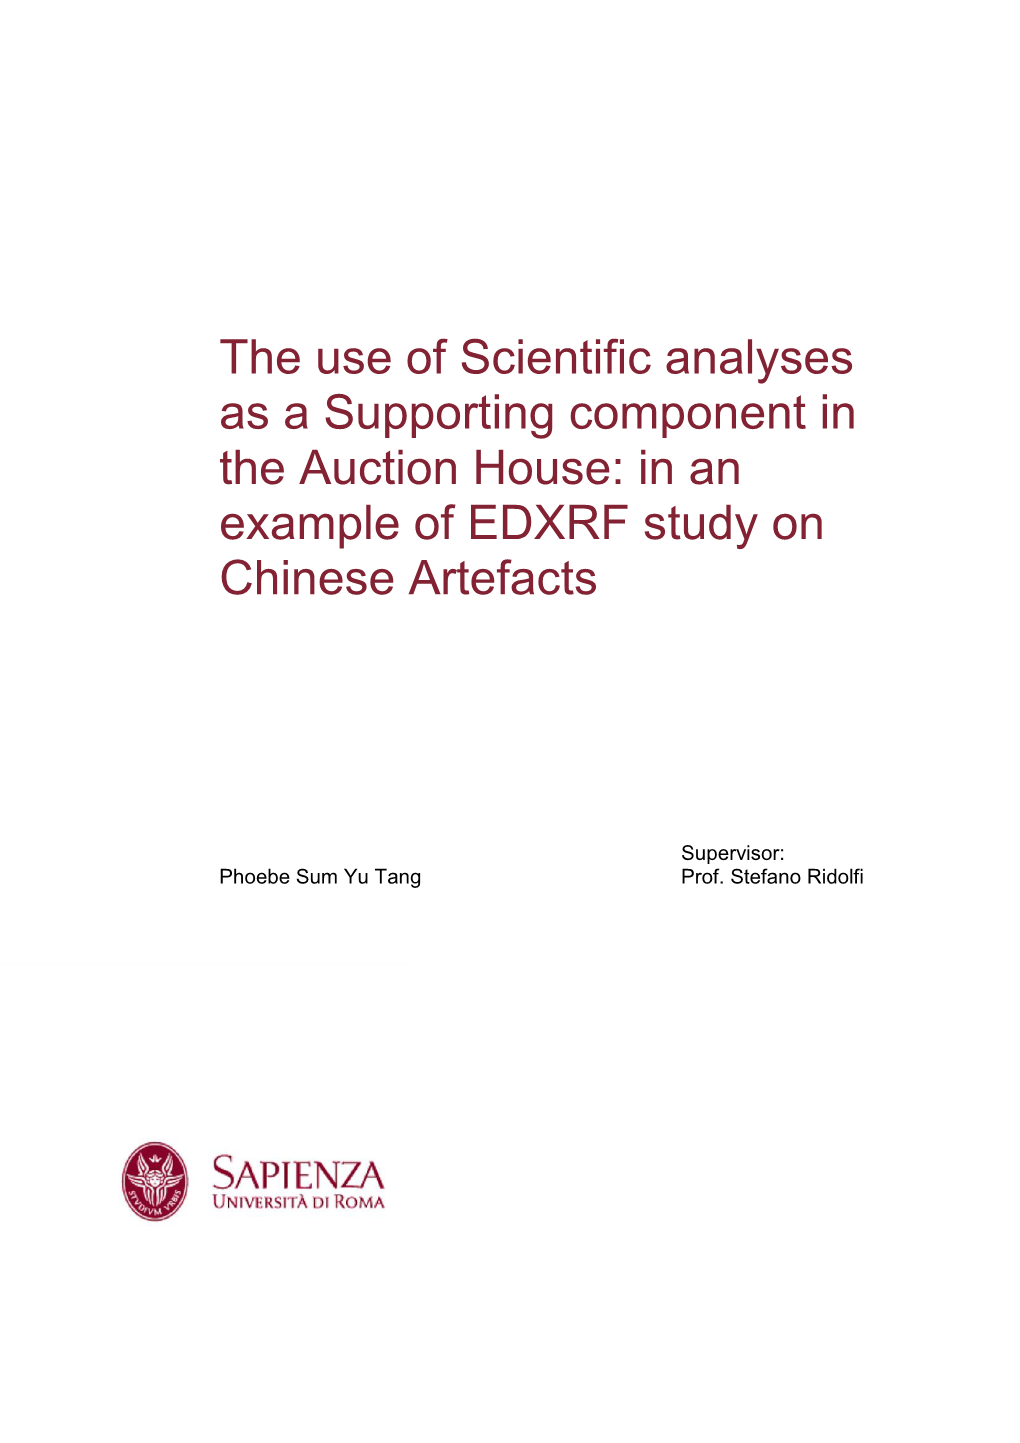 The Use of Scientific Analyses As a Supporting Component in the Auction House: in an Example of EDXRF Study on Chinese Artefacts